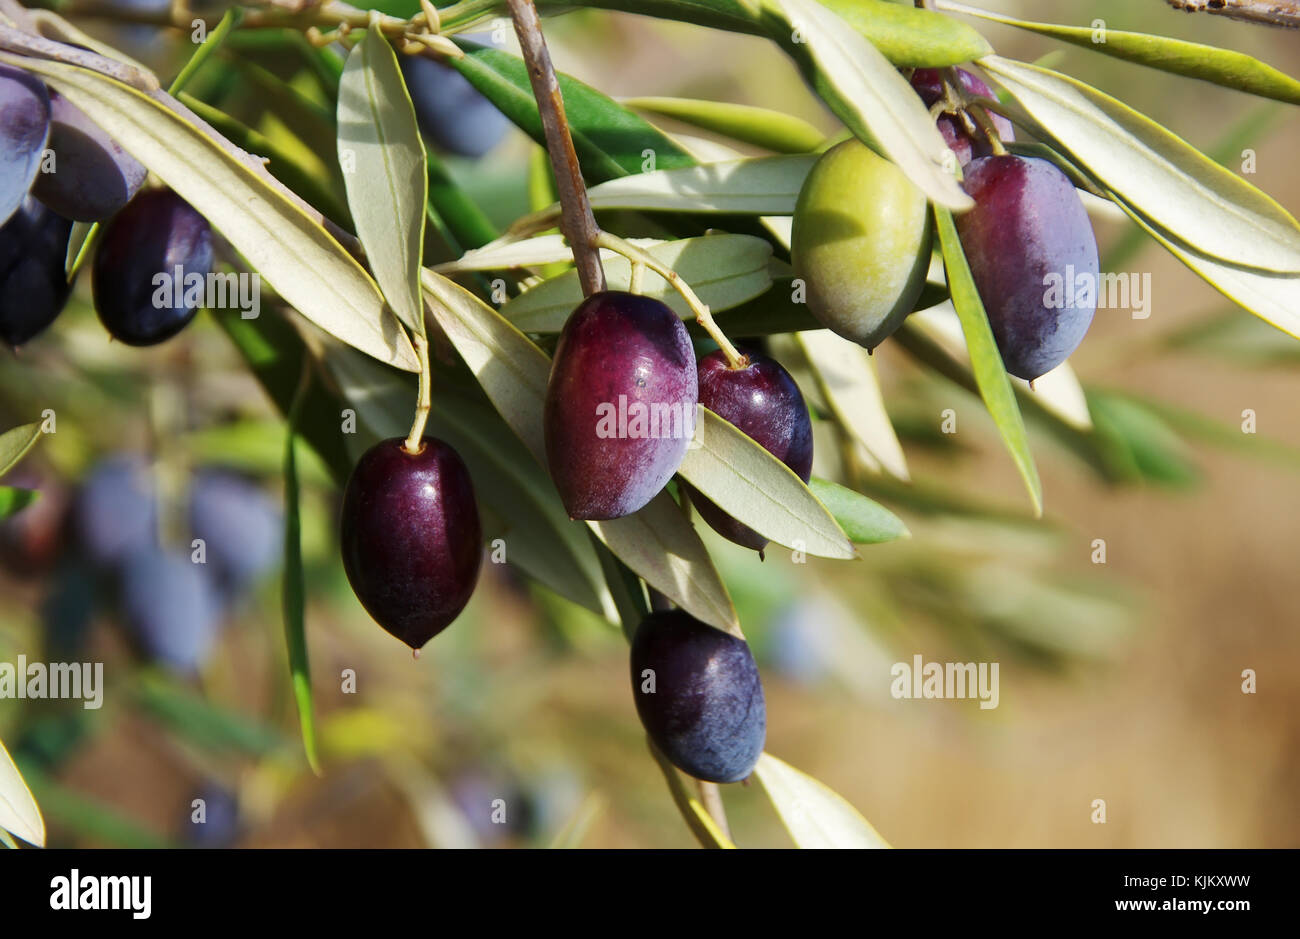 ripe olives on the branch of olive tree Stock Photo - Alamy